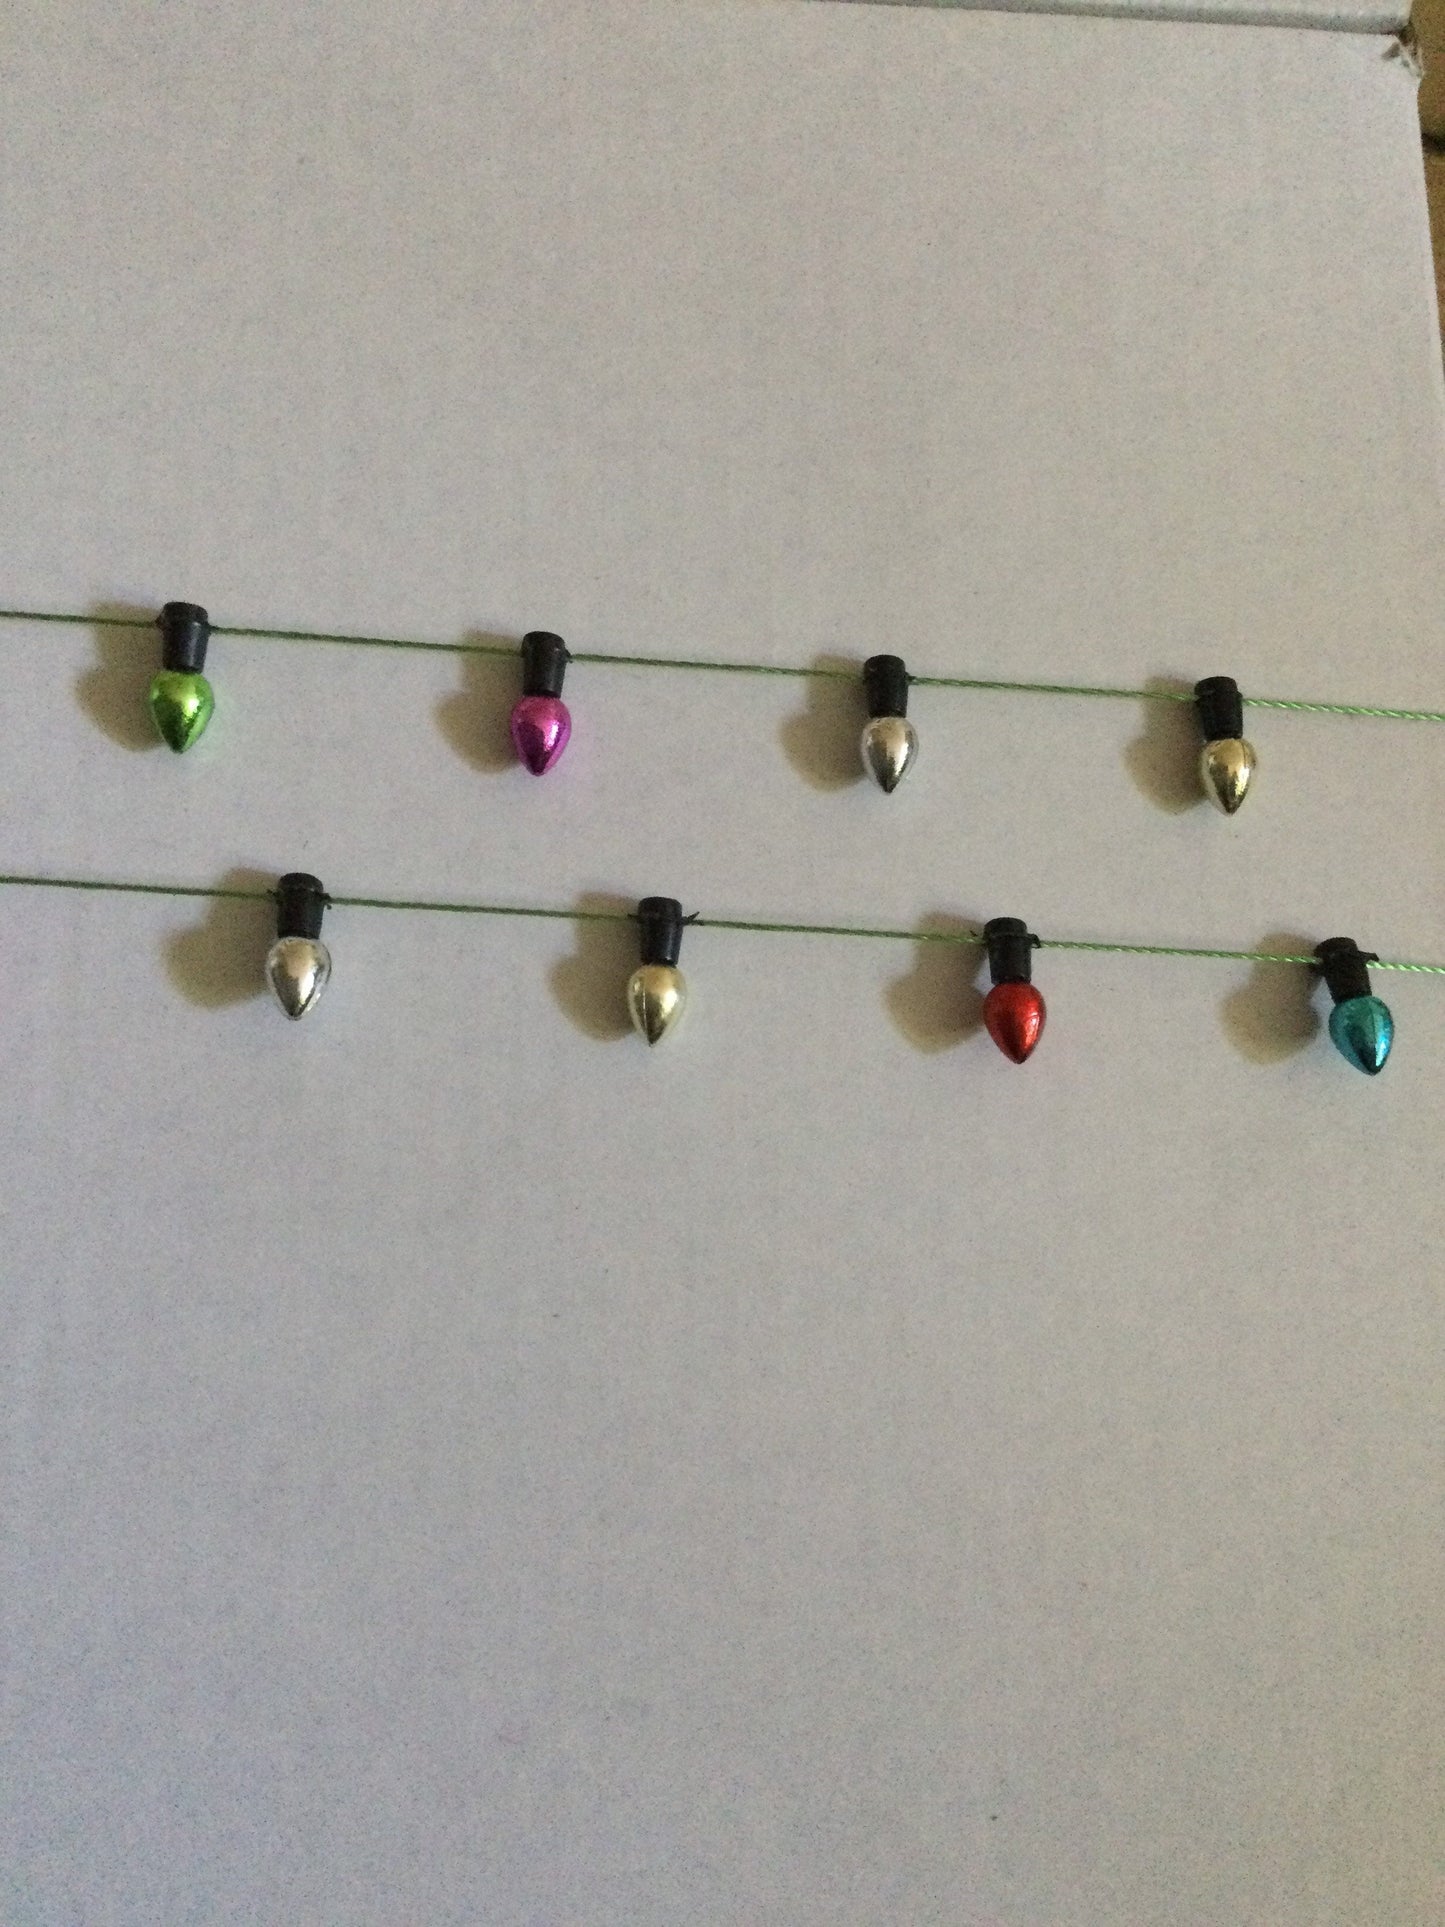 50cm string of Miniature Christmas non working fairy lights cake toppers